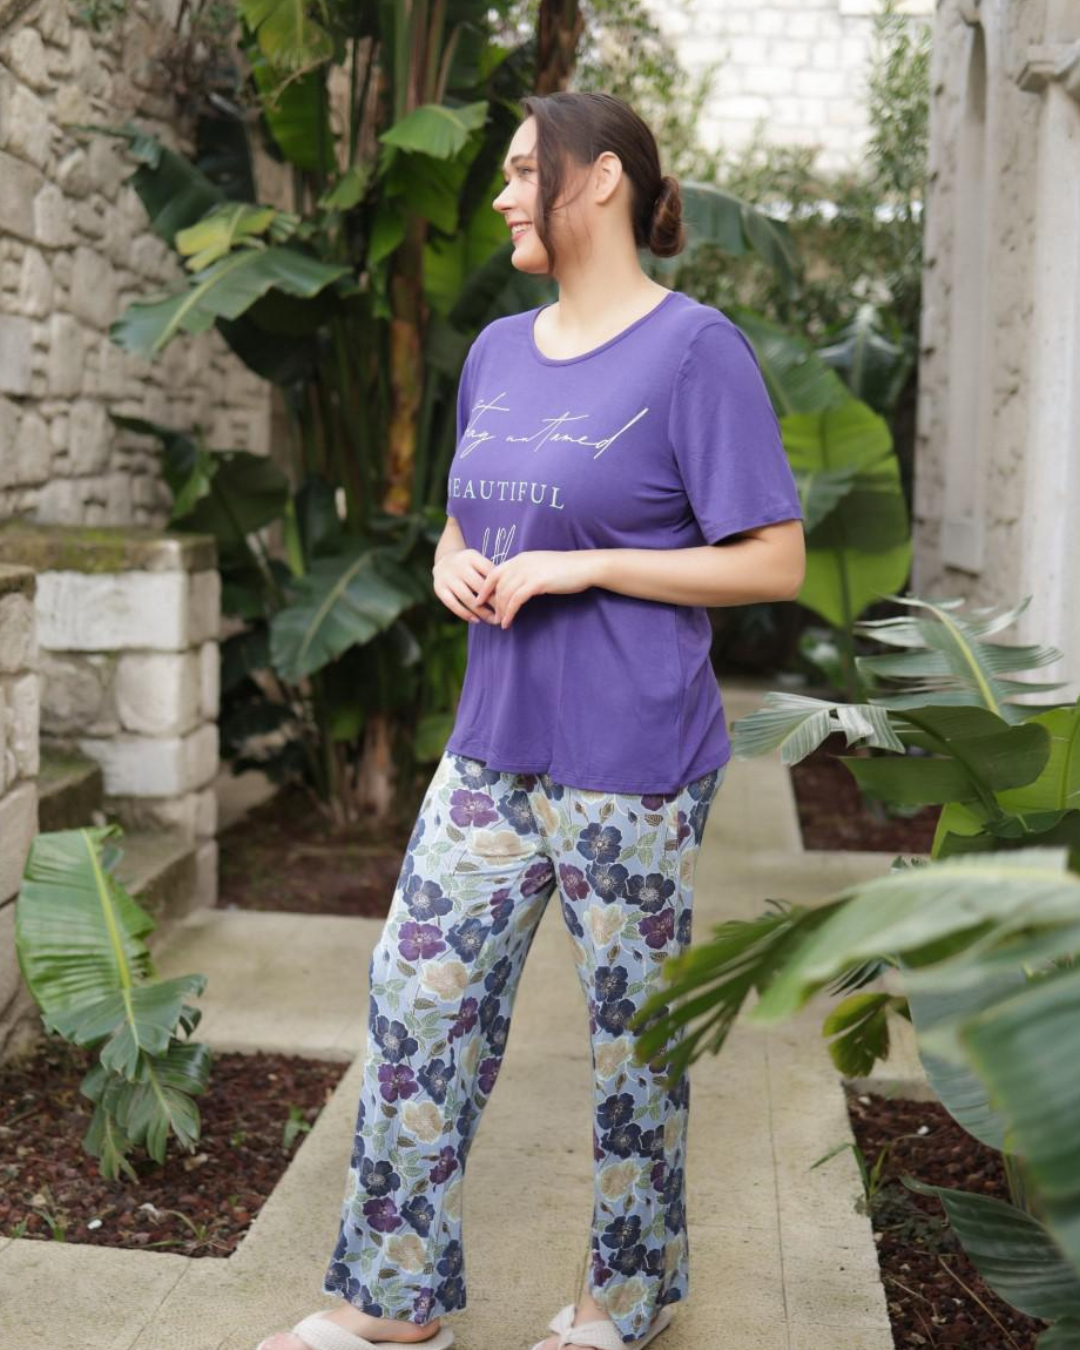 BEAUTIFUL Women's pajamas, half-sleeved t-shirt with lace back and floral floral trousers